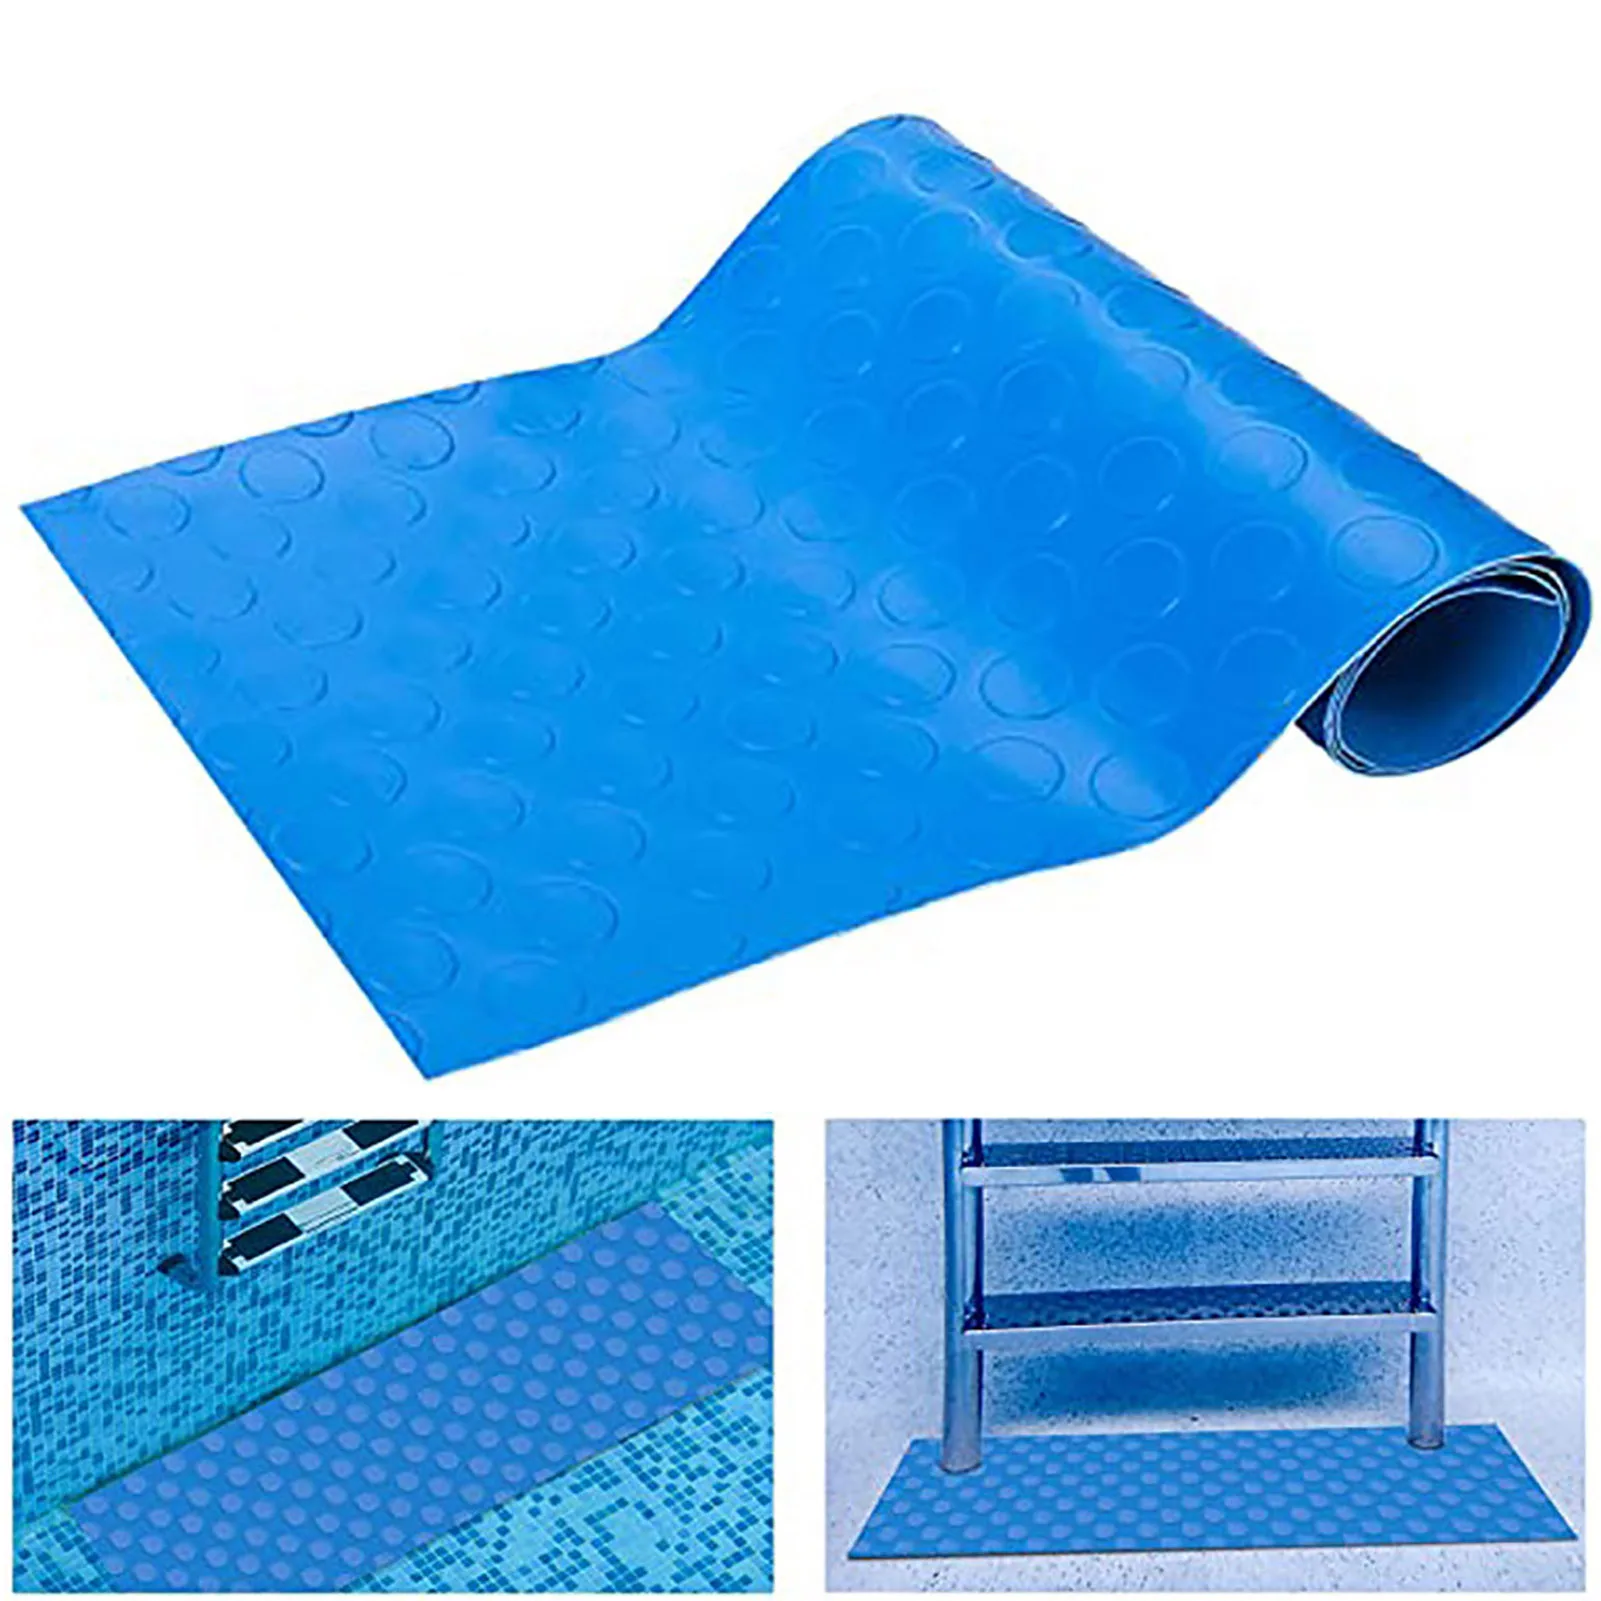 Swimming Pool Ladder Mat Pad 9.17x36.3 Non-Slip Texture Protective Pool Ladder Rubber Mats Step Pads Safety Liner for Swimming Pools Floor Stairs Ladders and Pool Liner 3 Rolls/Dot 